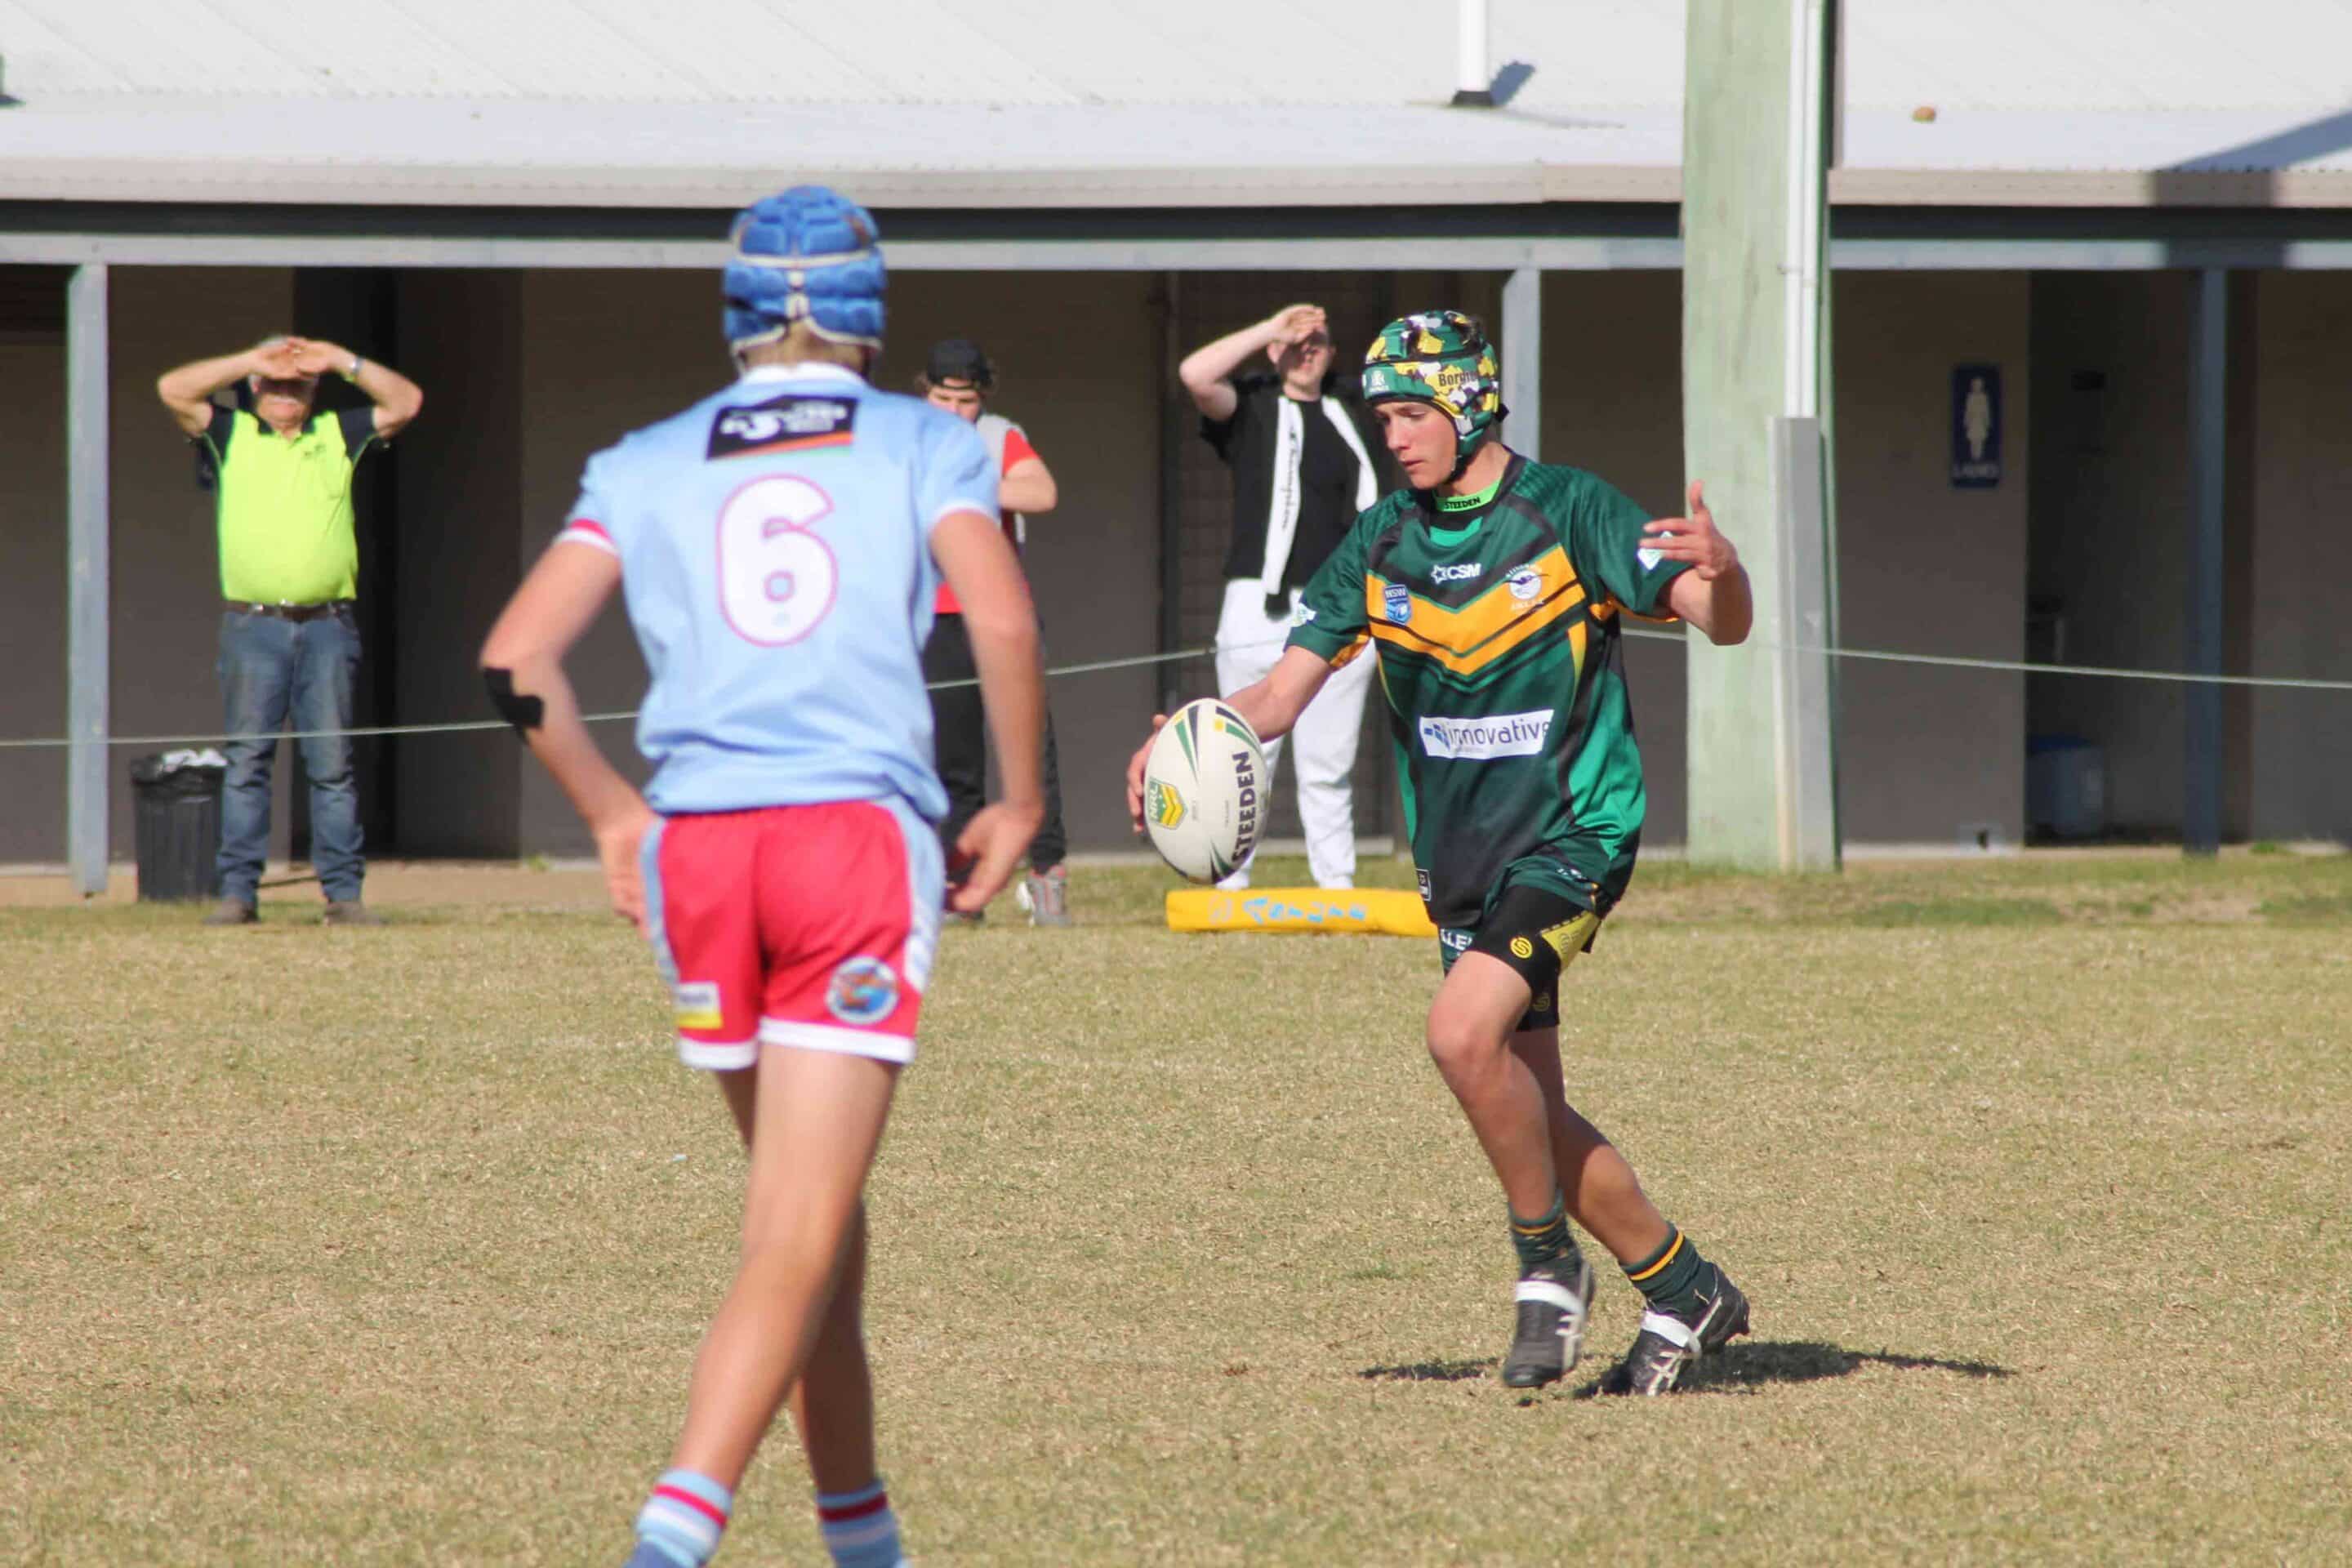 Two Boys Playing Rugby — Recycle in Port Kembla, NSW